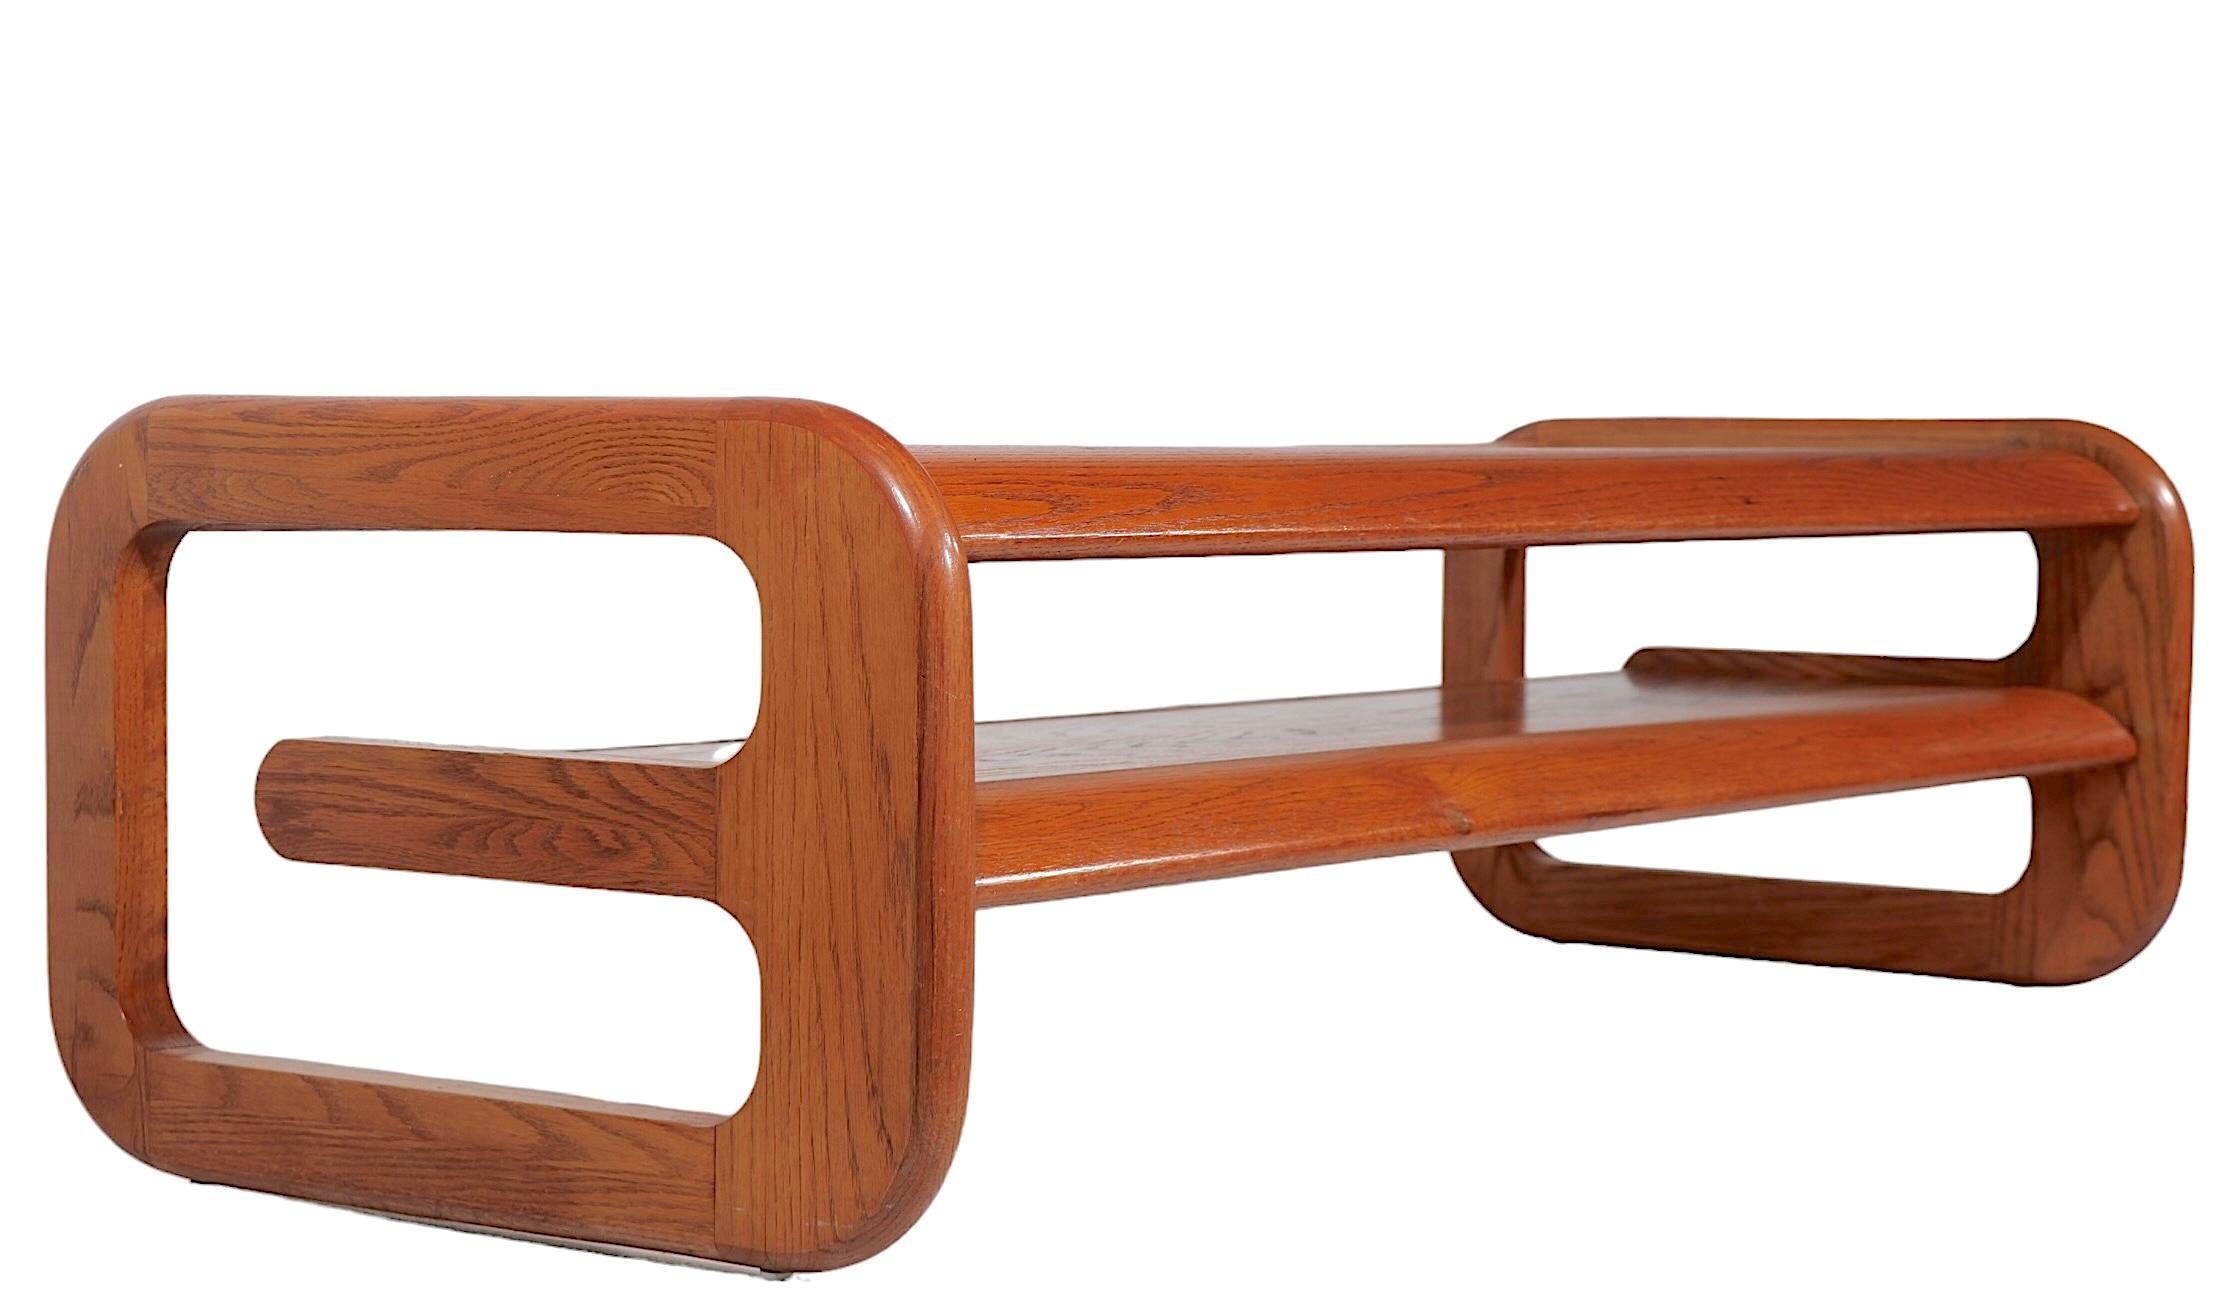 American  Post Modern Oak and Glass Coffee Table by Lou Hodges for Mersman  c. 1970's For Sale